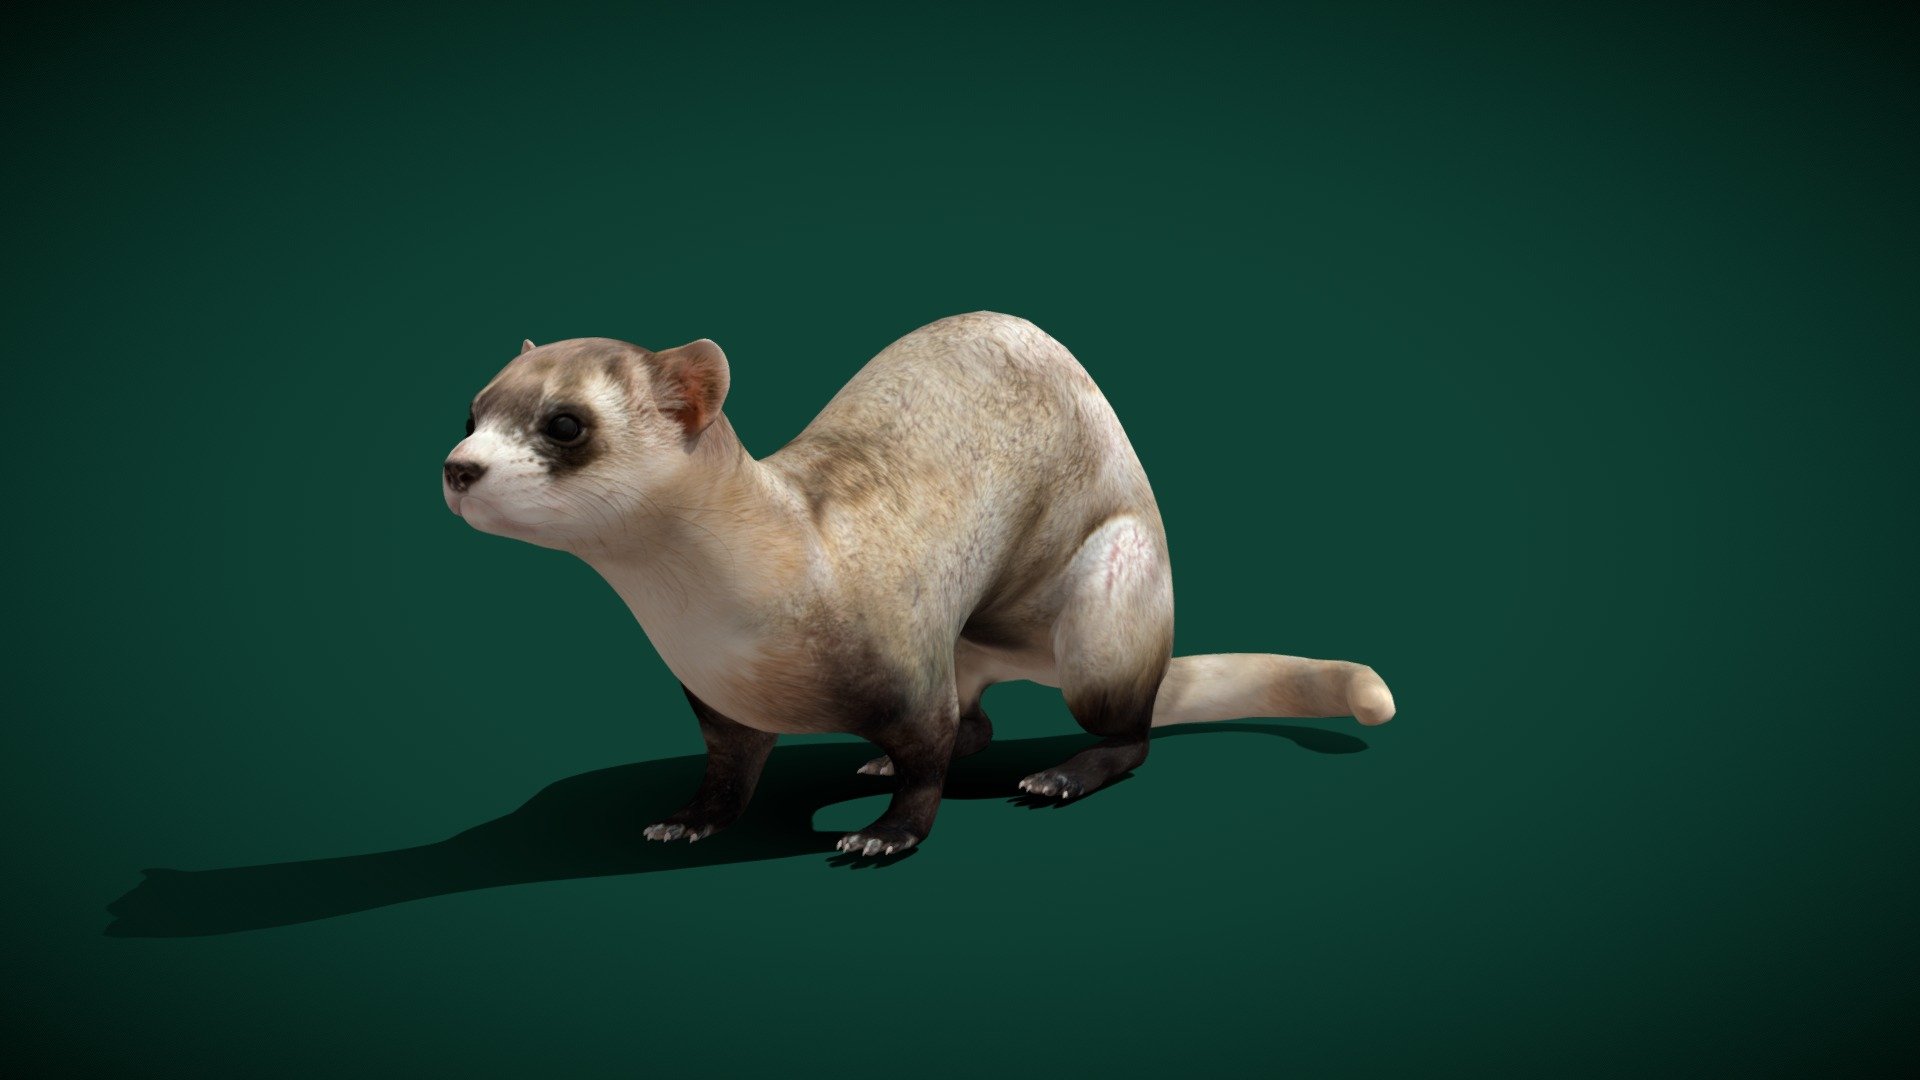 4KPBR
1 Draw Call
Animated 
The black-footed ferret, also known as the American polecat or prairie dog hunter, is a species of mustelid native to central North America. The black-footed ferret is roughly the size of a mink and is similar in appearance to the European polecat and the Asian steppe polecat. Wikipedia
Conservation status: Endangered (Population increasing) Encyclopedia of Life
Scientific name: Mustela nigripes
Trophic level: Carnivorous Encyclopedia of Life
Mass: 910 g (Adult) Encyclopedia of Life
Domain: Eukaryota
Family: Mustelidae
Kingdom: Animalia - Black-footed Ferret (Endangered) - Buy Royalty Free 3D model by Nyilonelycompany 3d model